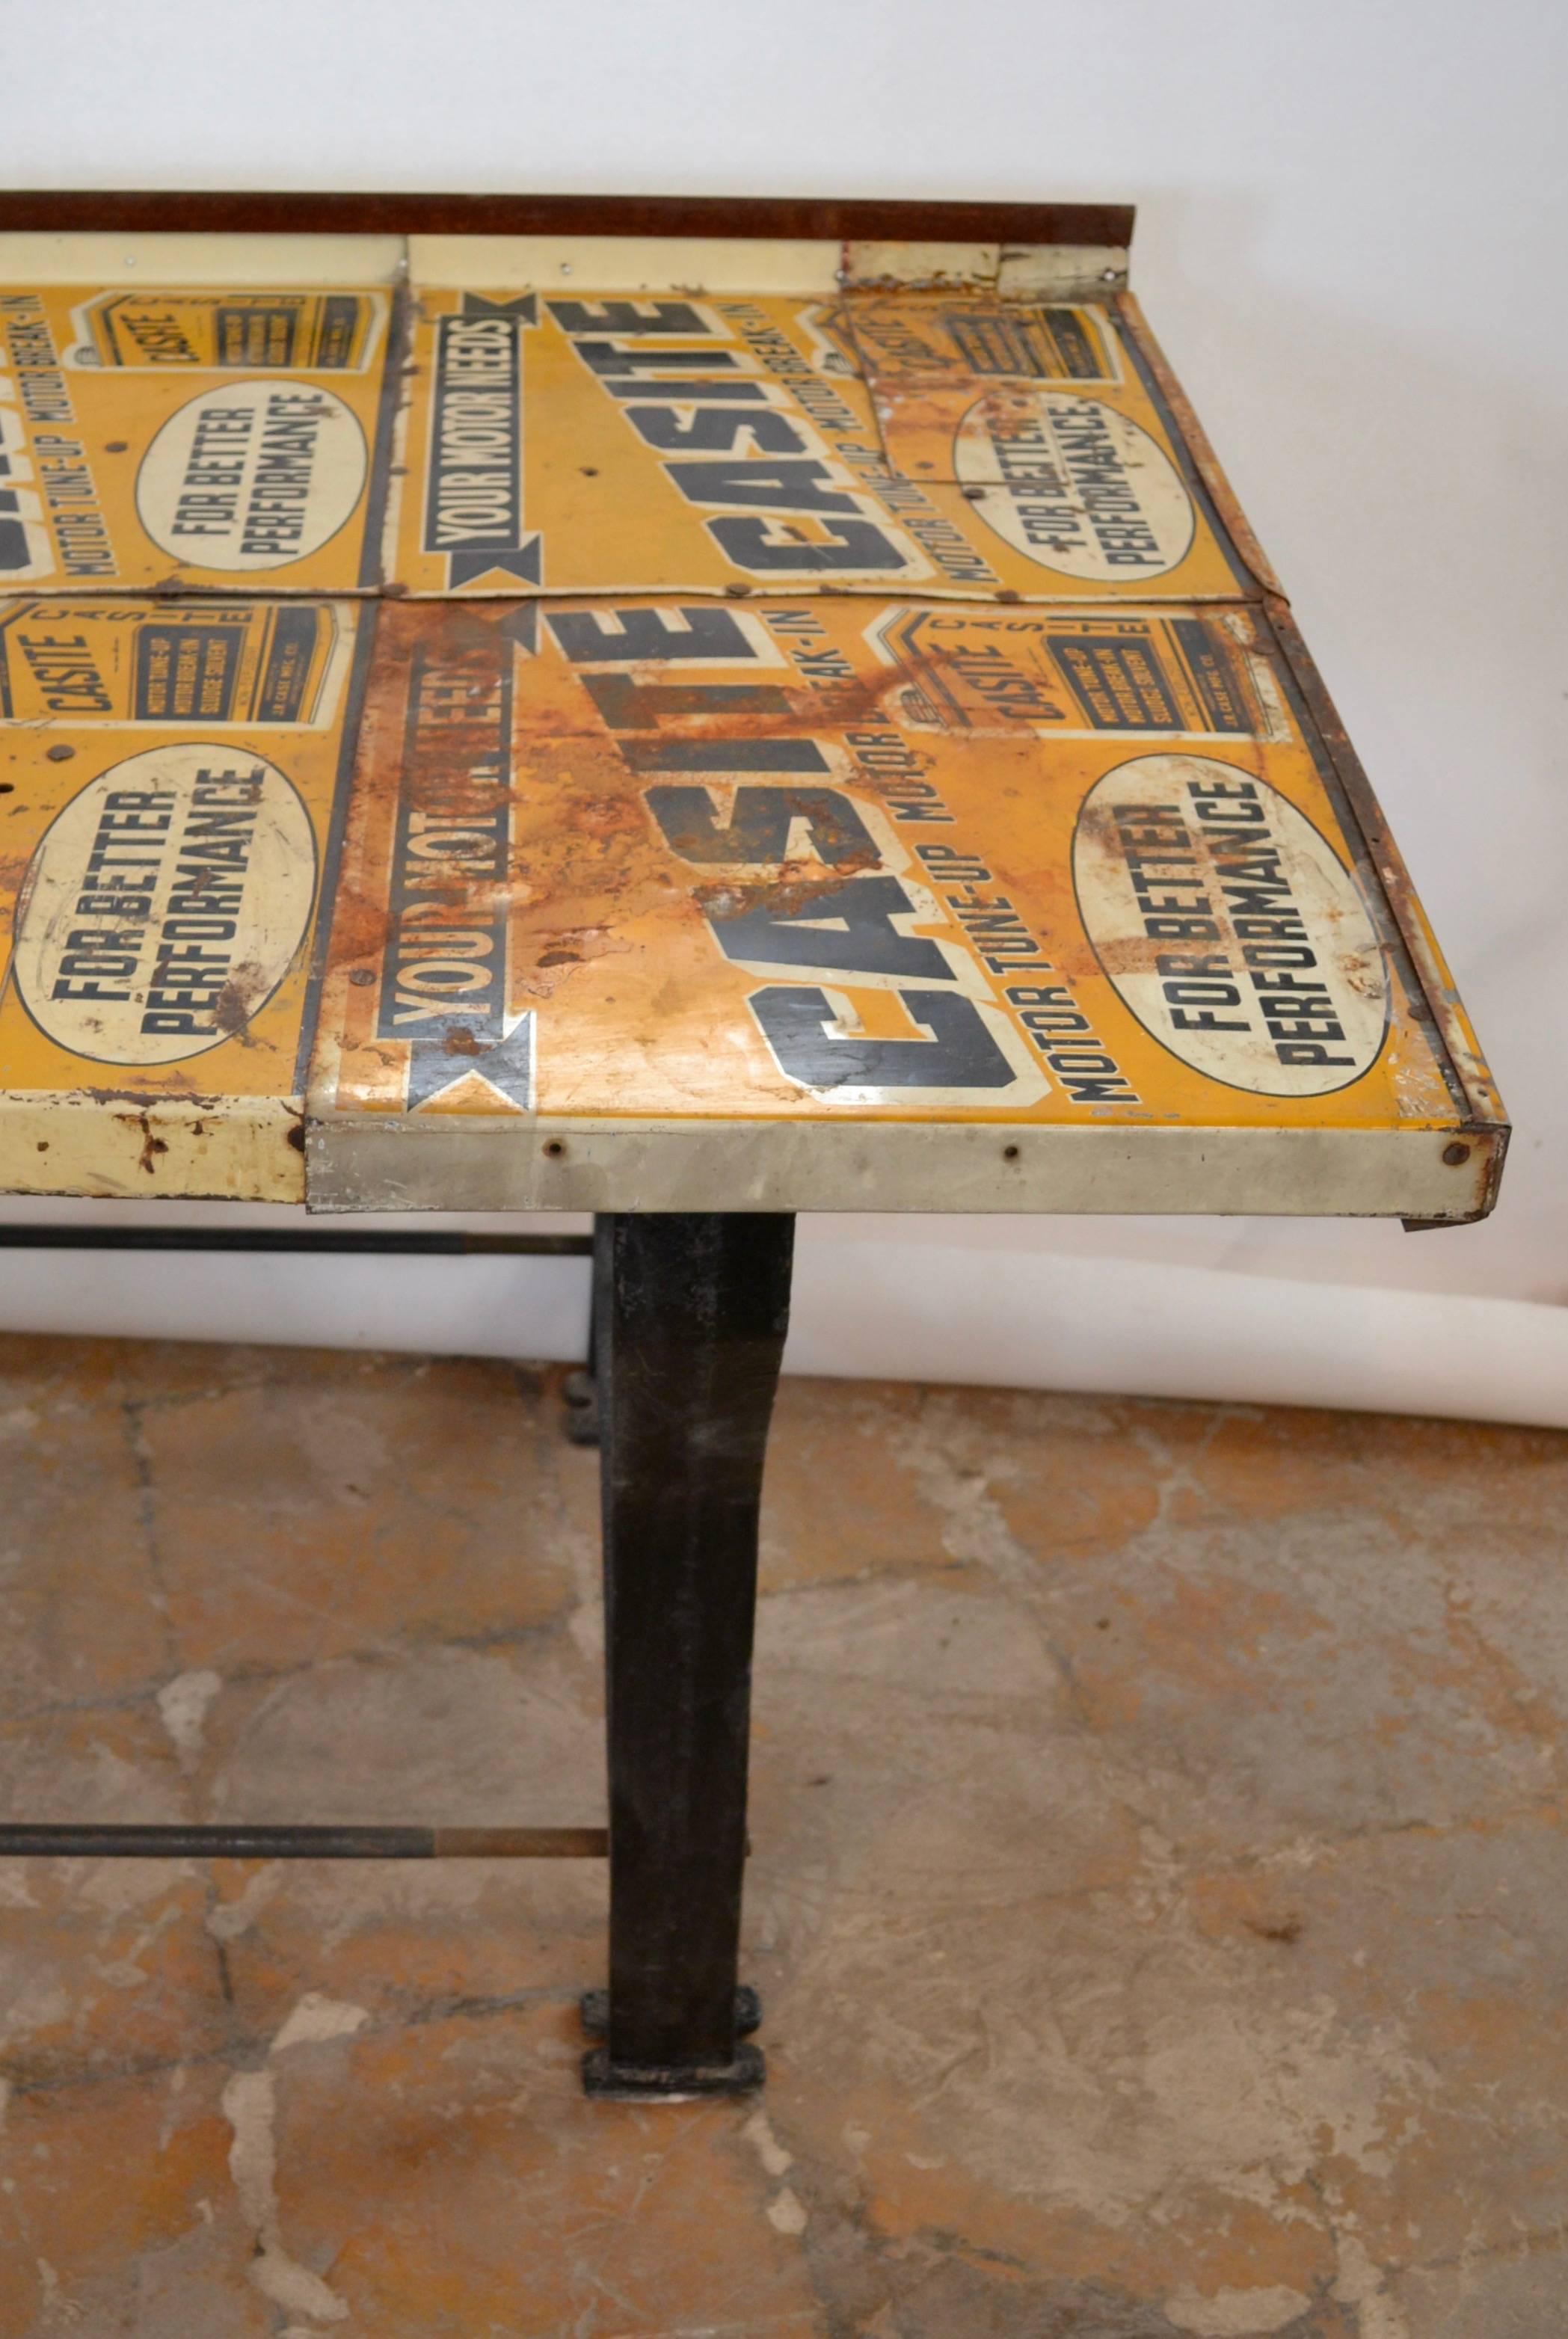 Steel Casite Sign Work Bench For Sale